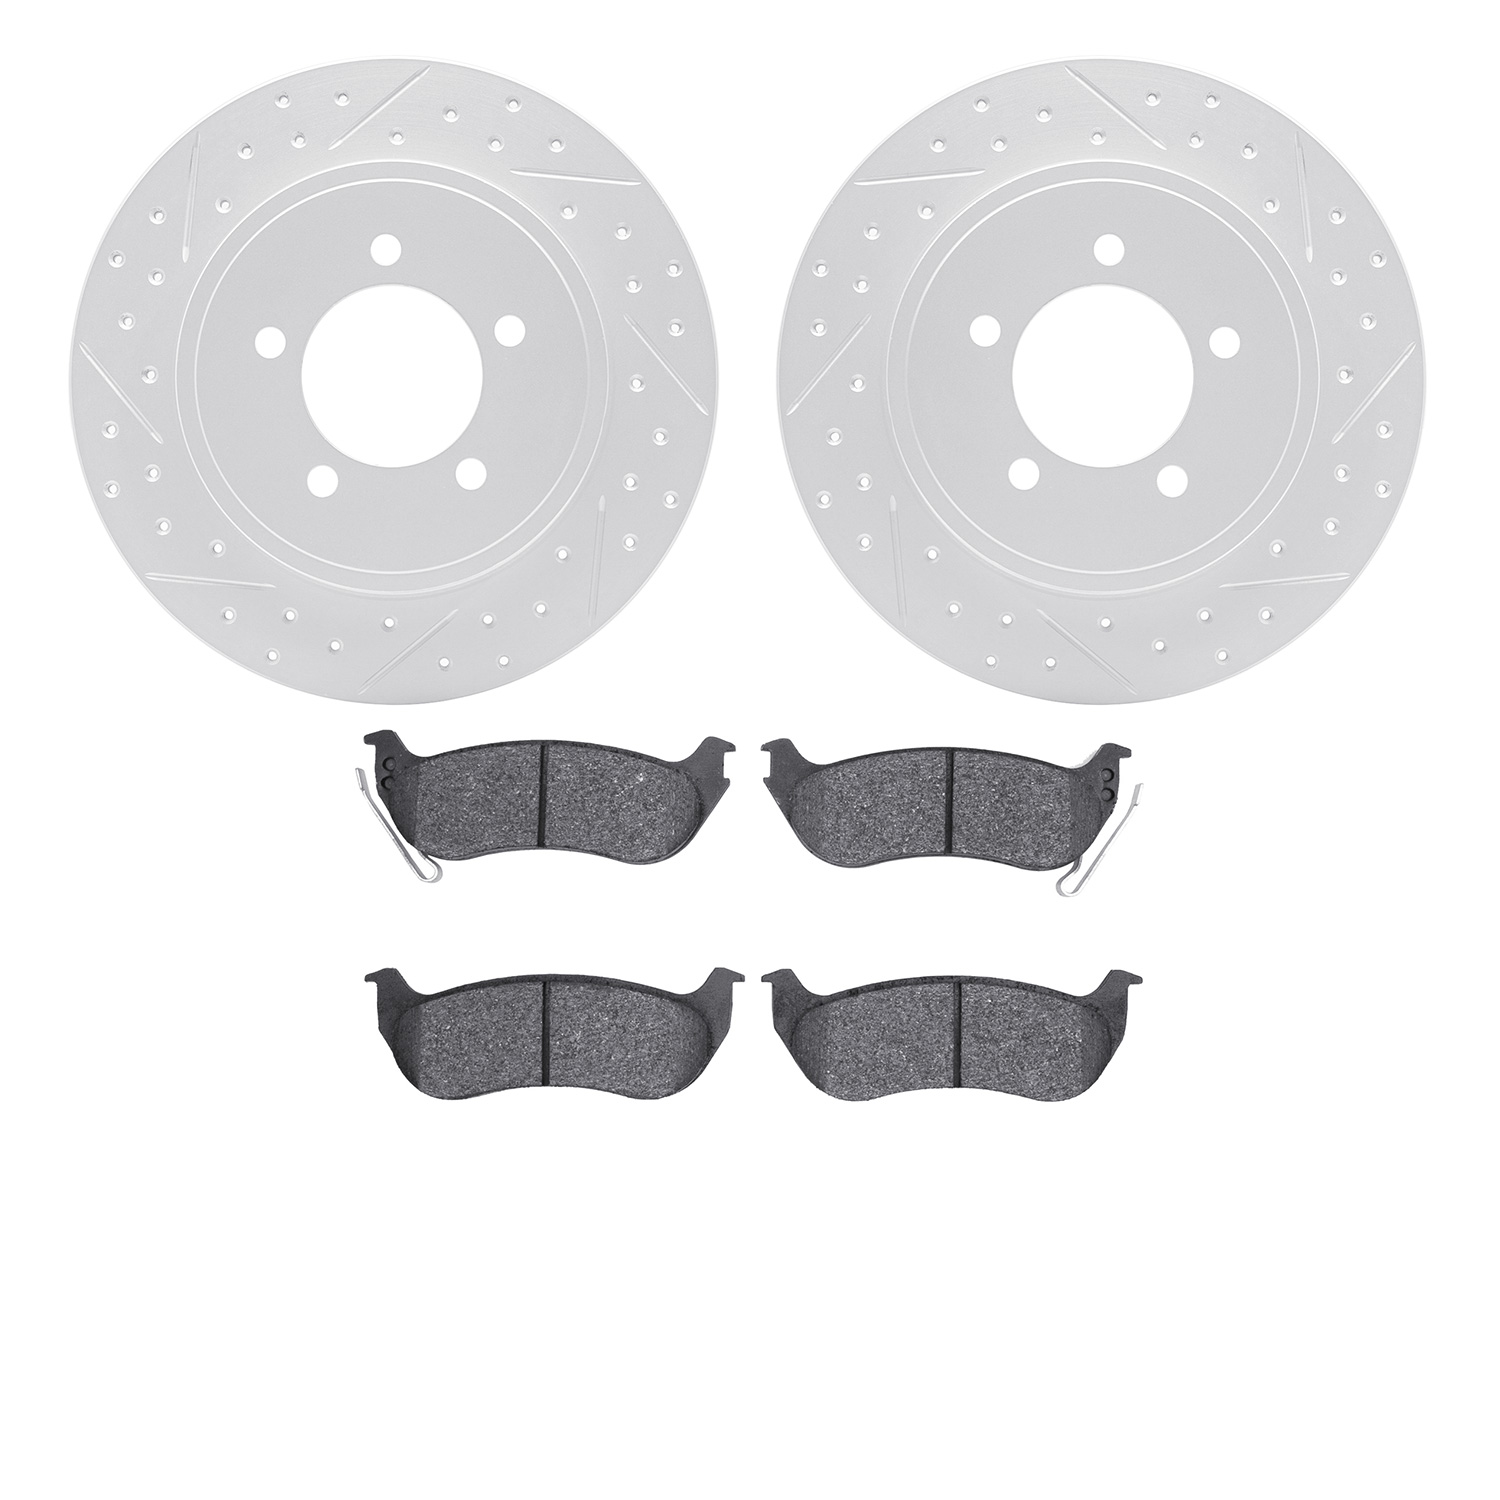 2402-54040 Geoperformance Drilled/Slotted Brake Rotors with Ultimate-Duty Brake Pads Kit, 2006-2010 Ford/Lincoln/Mercury/Mazda,